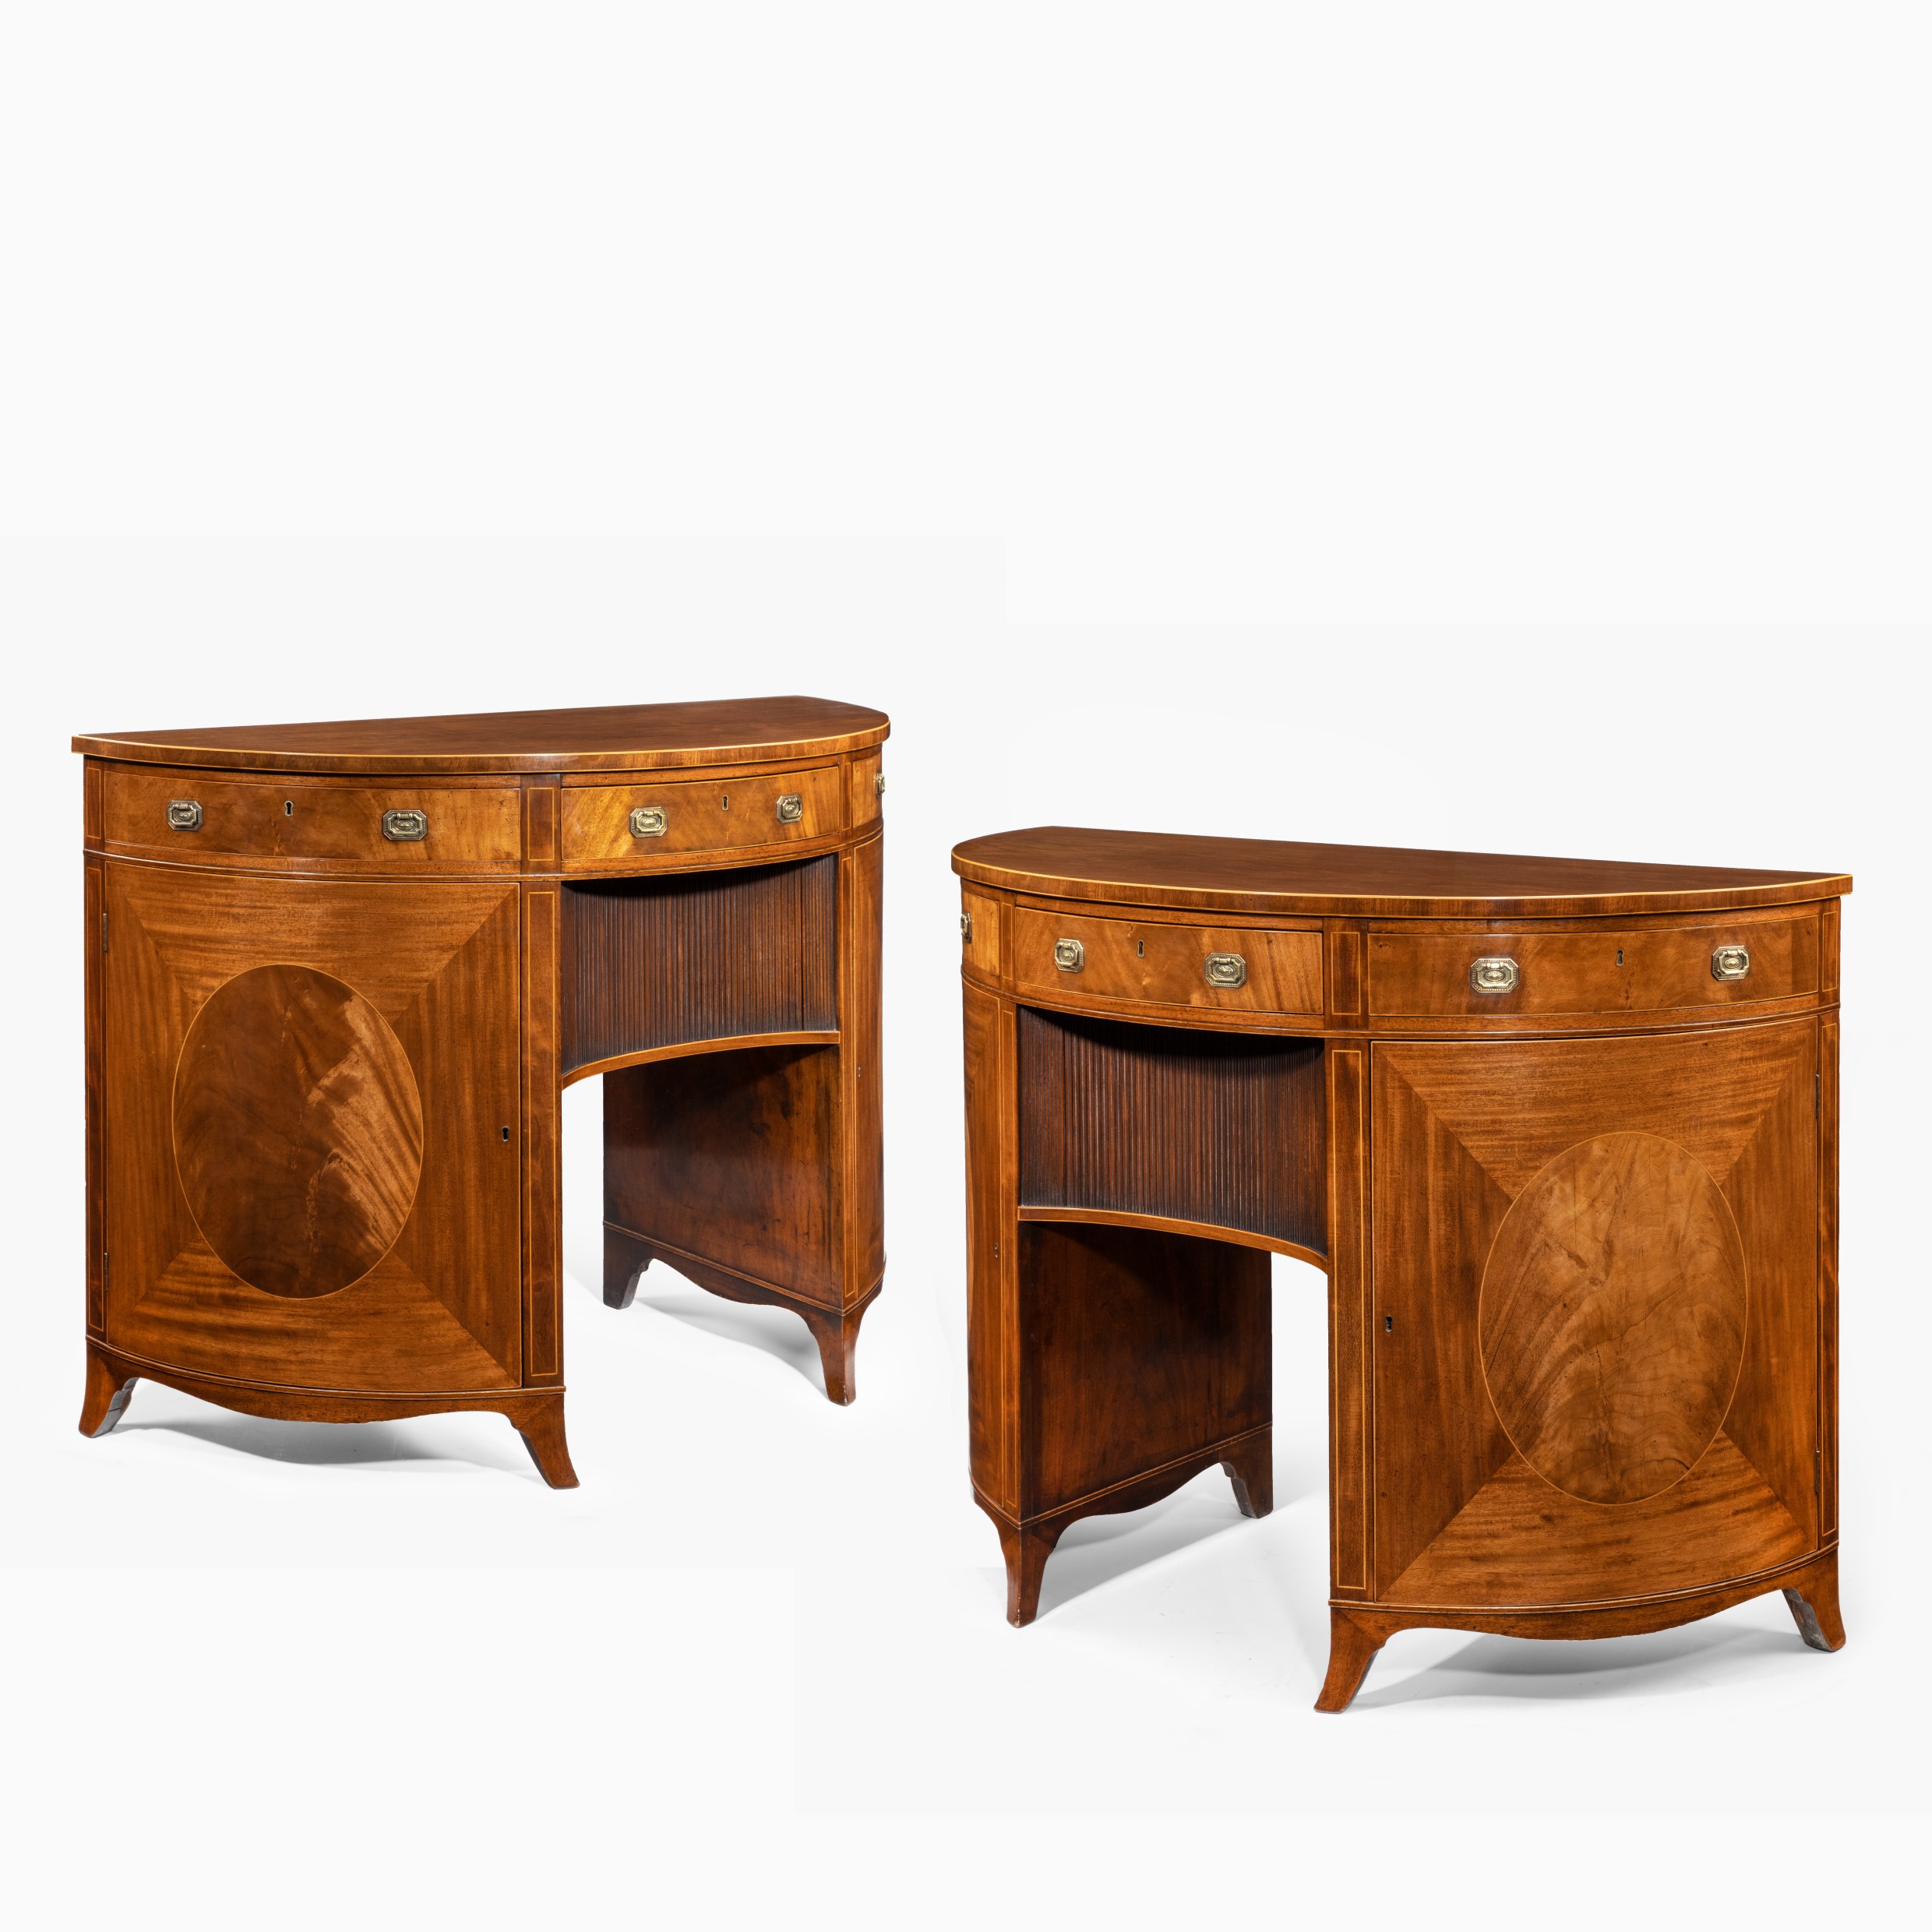 A fine pair of George III figured mahogany side cabinets, in the manner of Thomas Sheraton Main